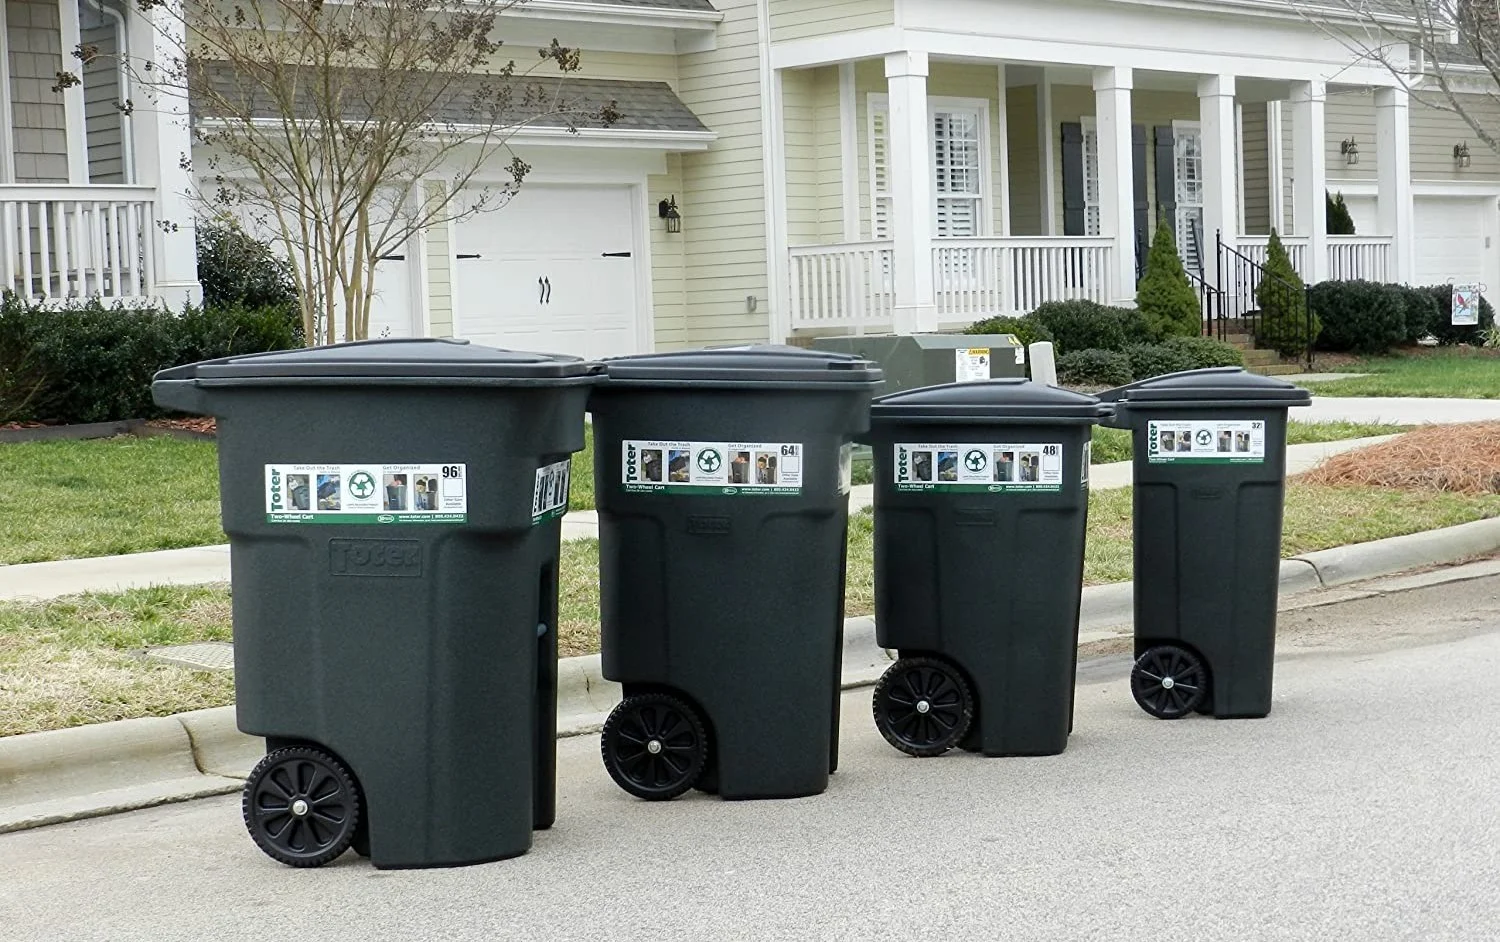 What Is A Requirement For An Outdoor Garbage Bin?